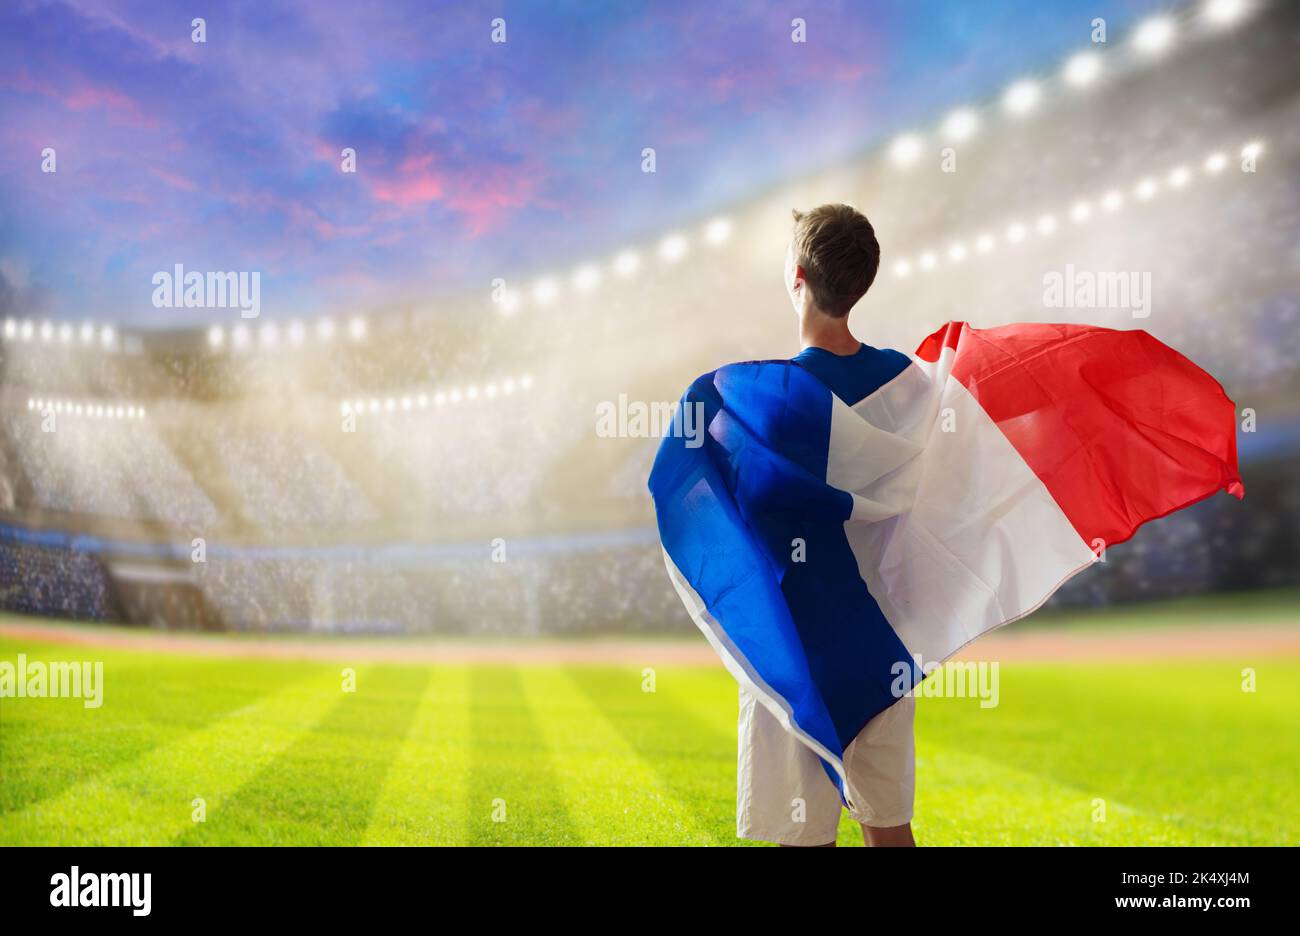 France football supporter on stadium. French fan on soccer pitch watching team play. Young player with flag and national jersey cheering for France. Stock Photo